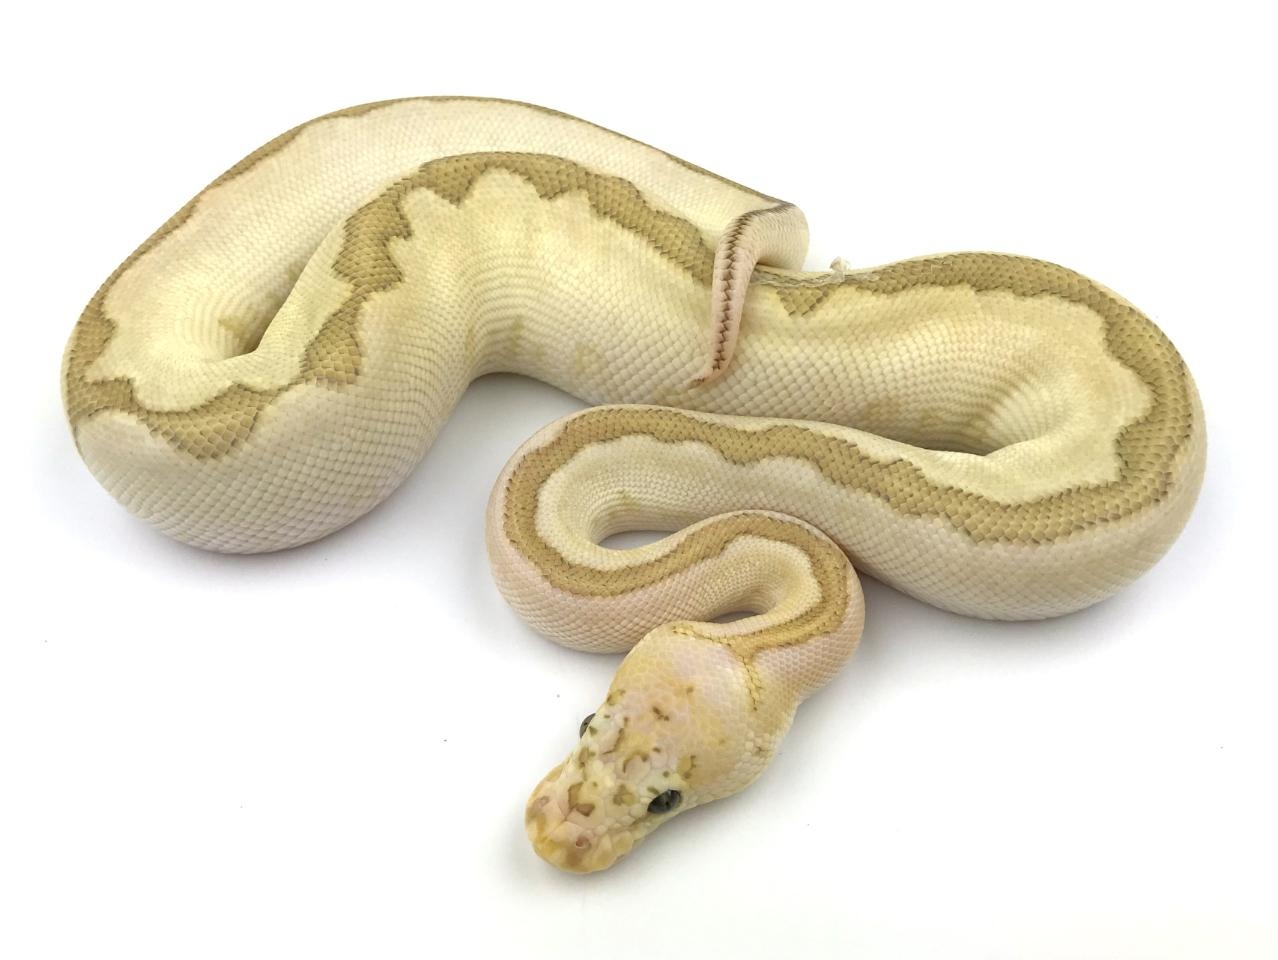 Bamboo Clown Ball Python by Royal Constrictor Designs